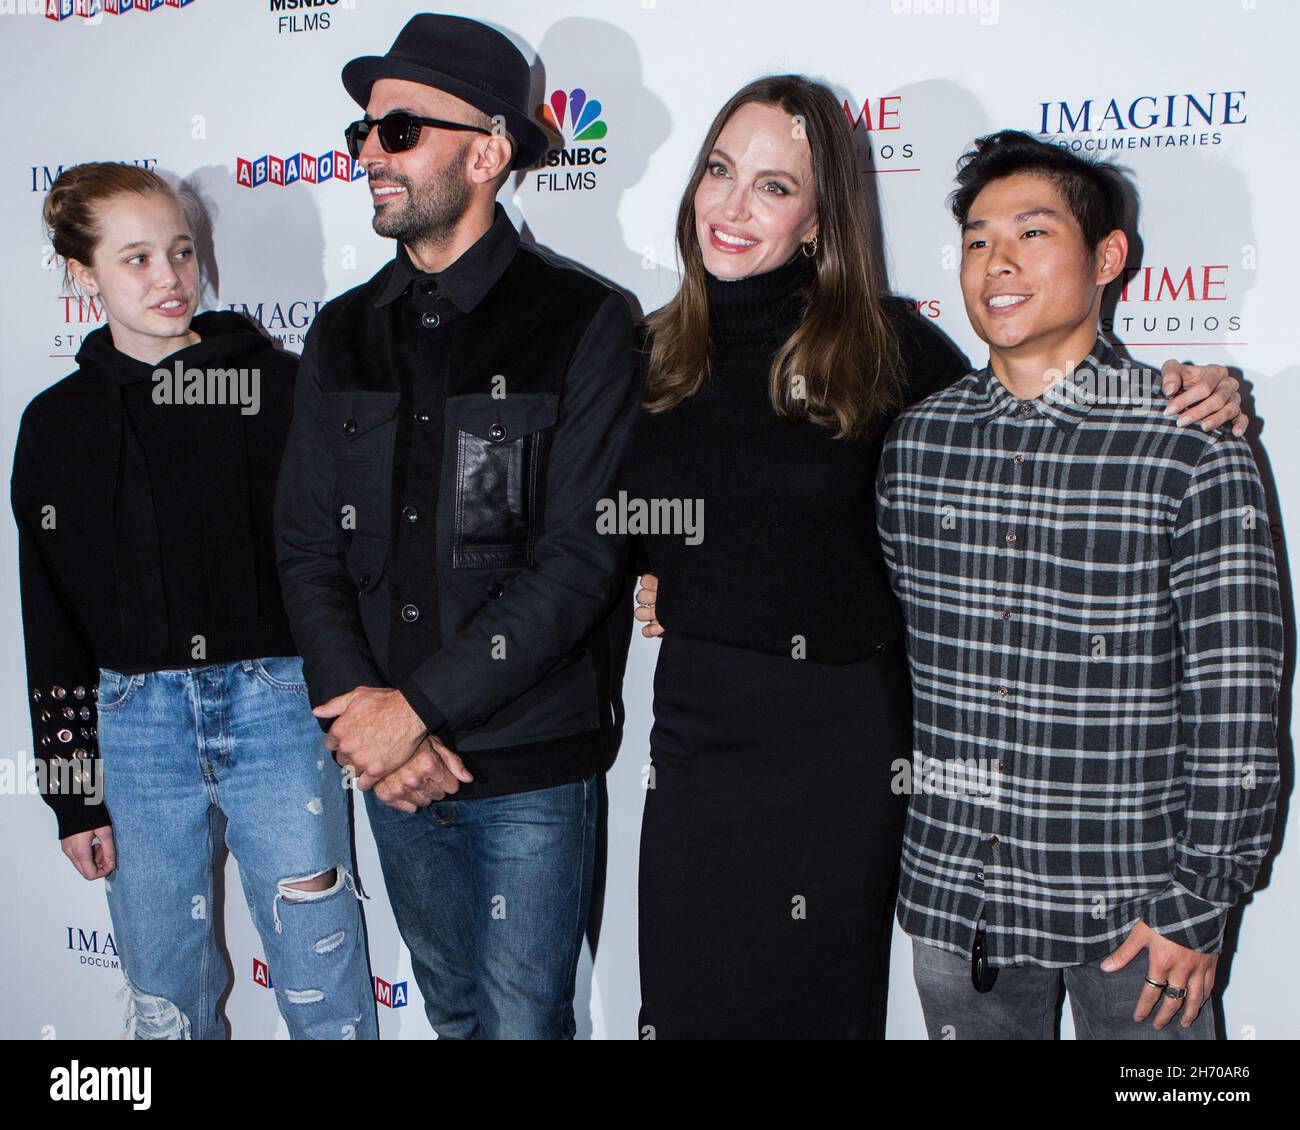 Los Angeles, United States. 18th Nov, 2021. LOS ANGELES, CALIFORNIA, USA - NOVEMBER 18: Shiloh Jolie-Pitt, street artist JR, actress Angelina Jolie and Pax Thien Jolie-Pitt arrive at the Los Angeles Premiere Of MSNBC Films' 'Paper & Glue: A JR Project' held at the Museum Of Tolerance on November 18, 2021 in Los Angeles, California, United States. (Photo by Rudy Torres/Image Press Agency/Sipa USA) Credit: Sipa USA/Alamy Live News Stock Photo